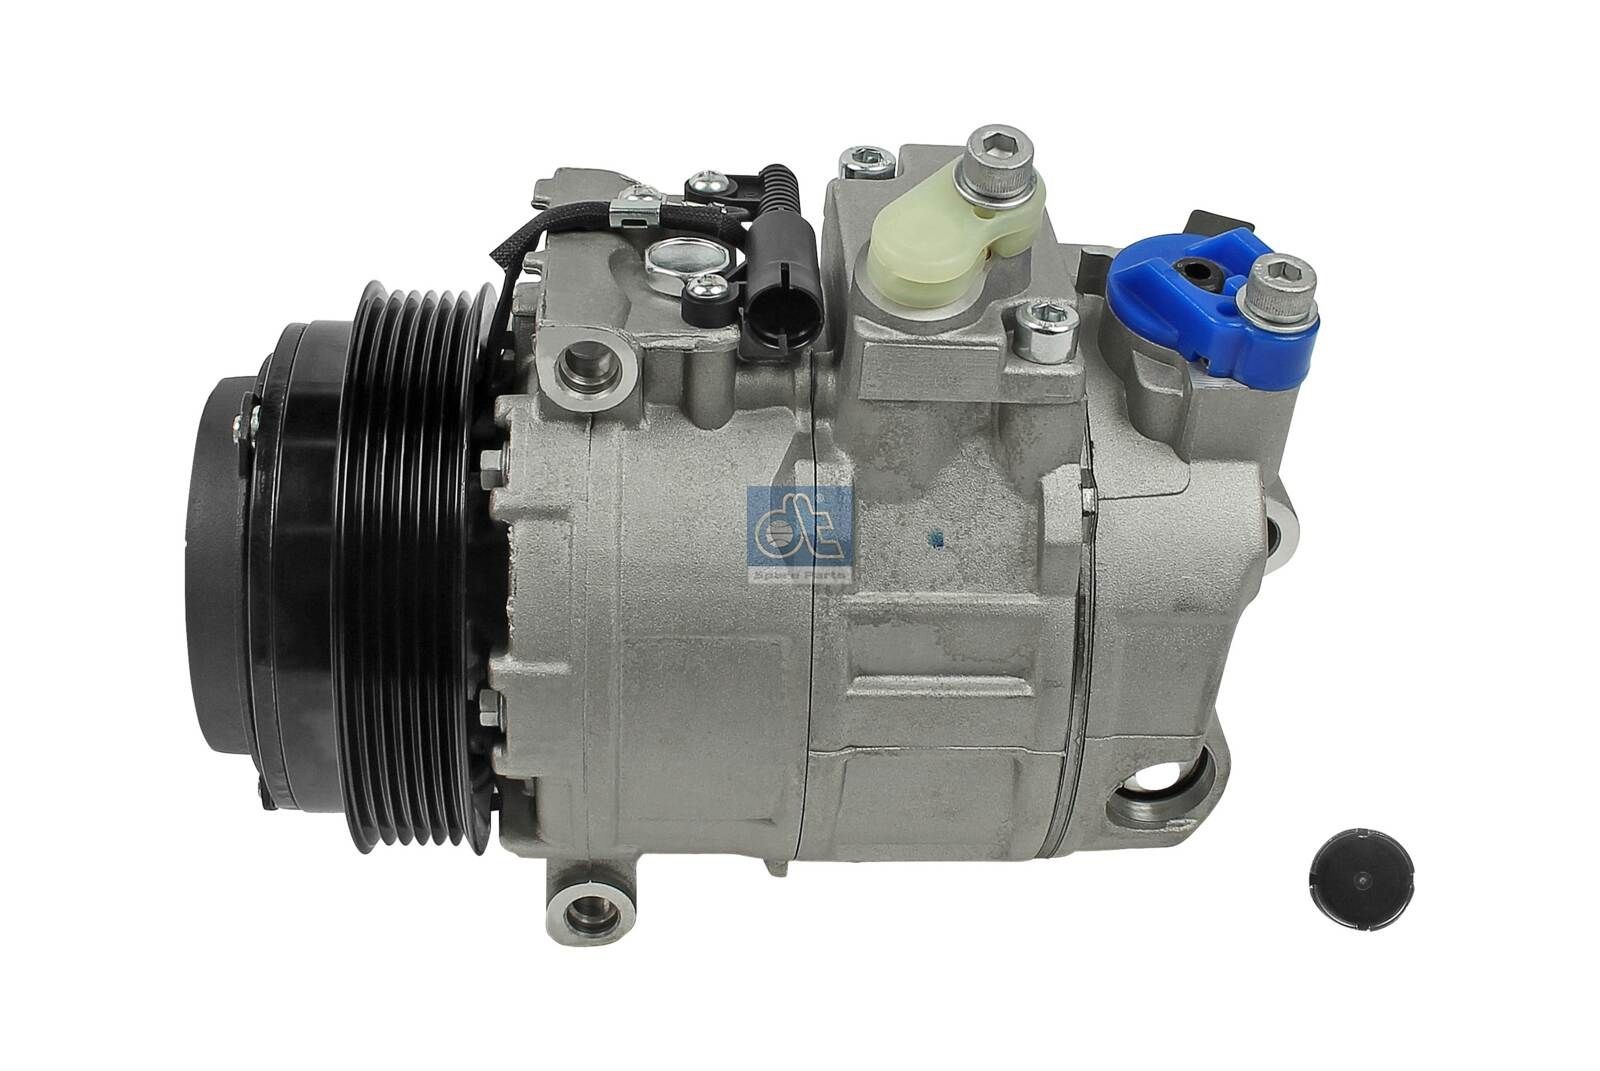 8FK 351 175-511 DT Spare Parts 4.66350 Air conditioning compressor A 000 234 20 11